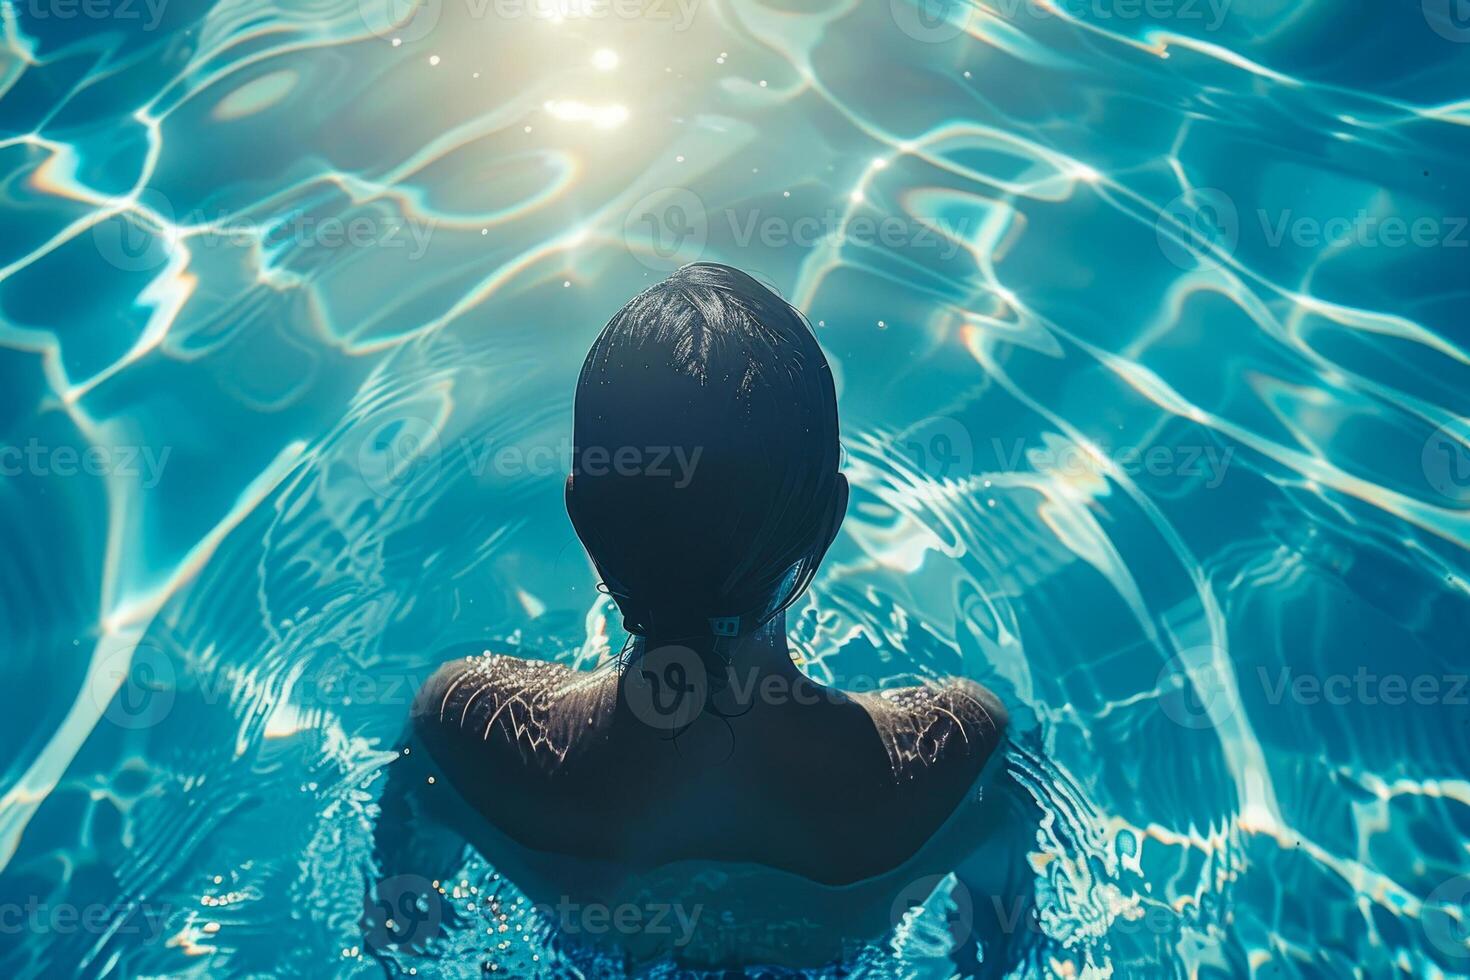 AI generated A person in contemplation, immersed in the sparkling blue waters of a swimming pool, with sunlight dancing on the surface photo